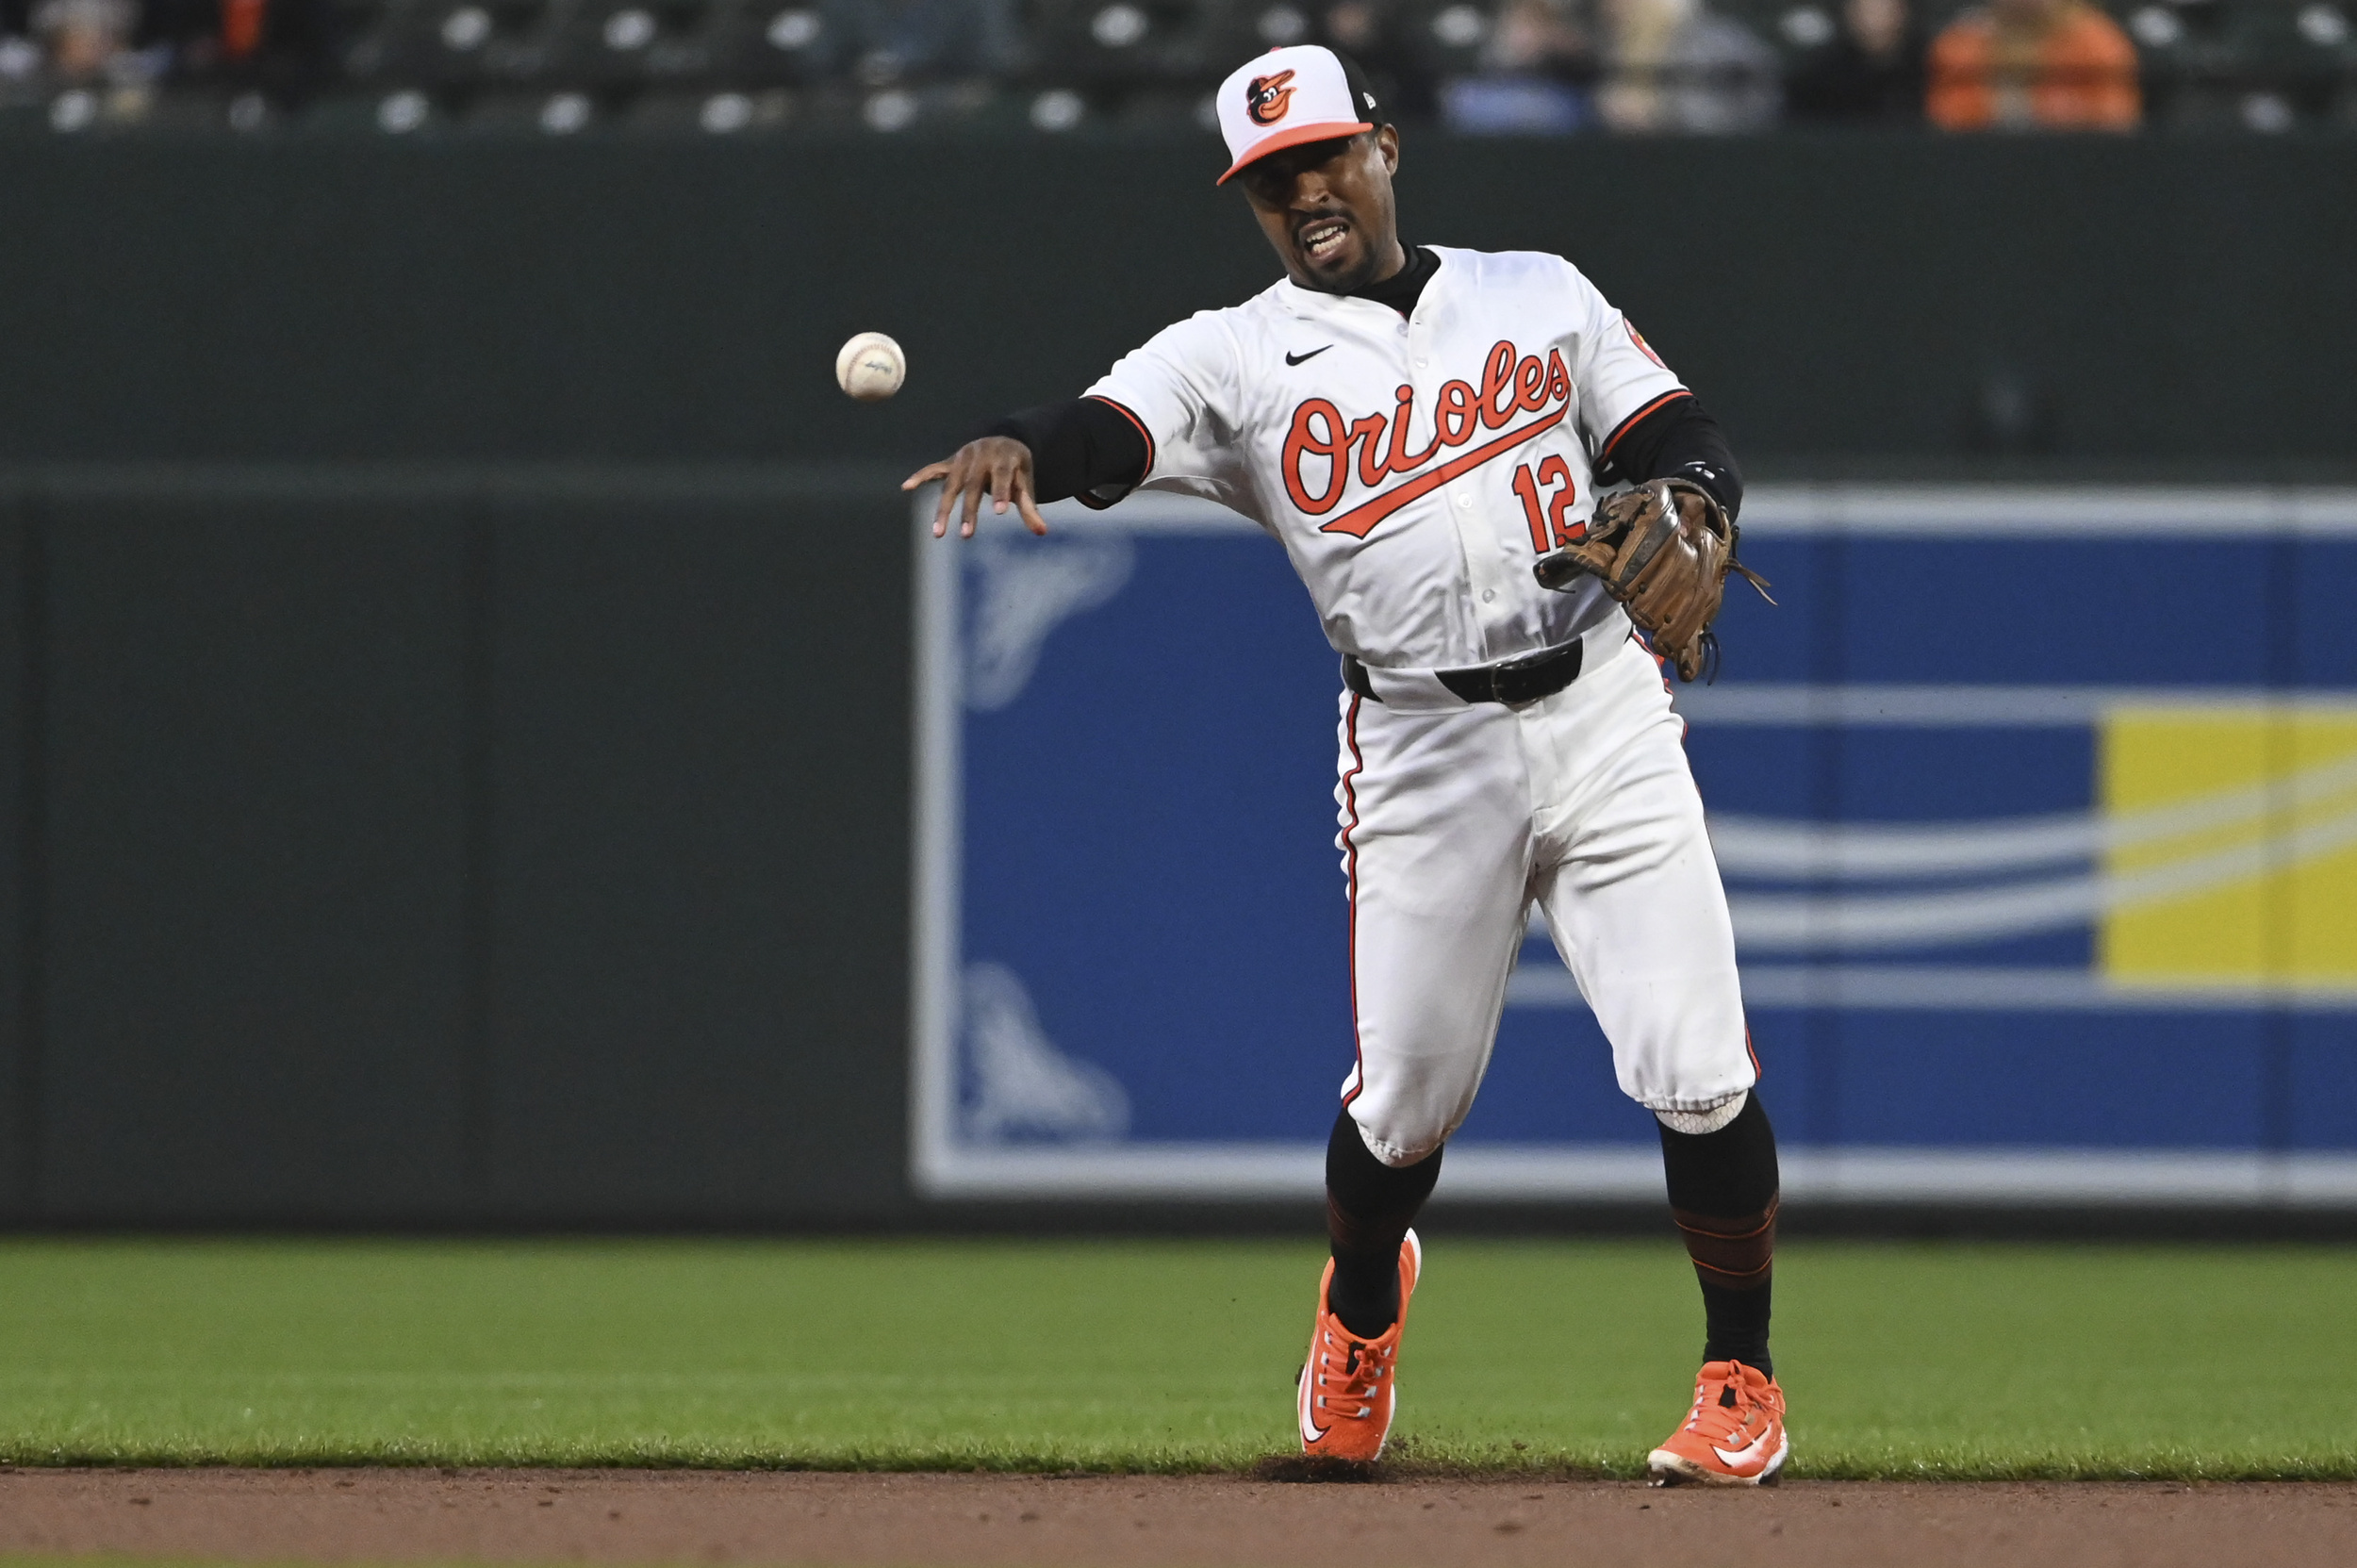 tony kemp sent classy message after being cut for jackson holliday